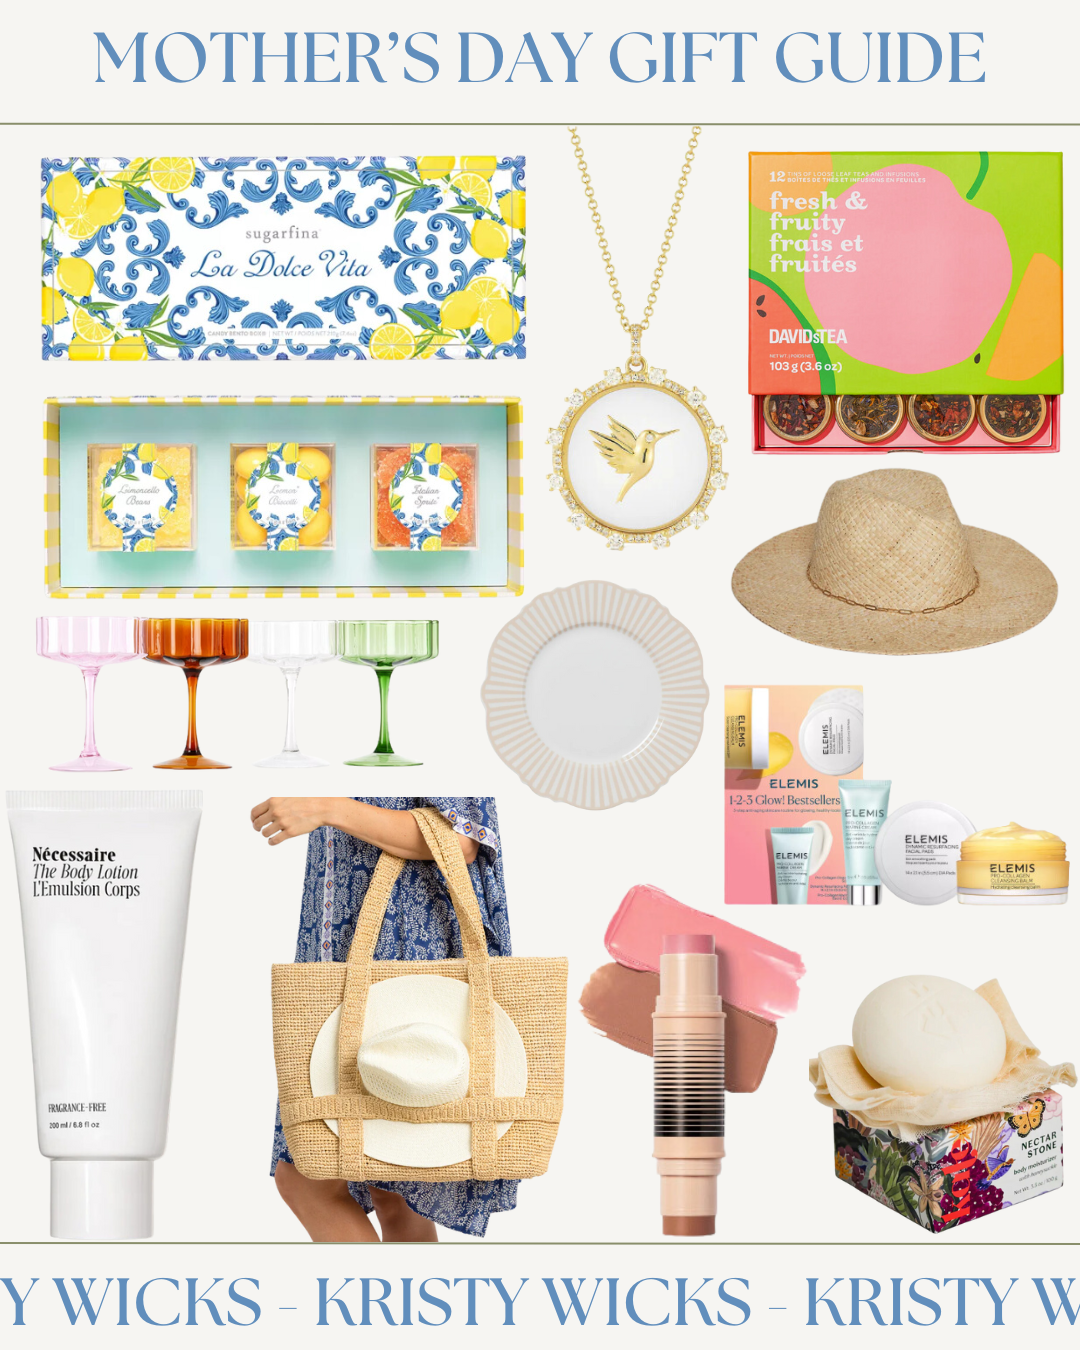 Mother's Day Gift guide with sugarfina, davidstea, ef collection necklace, glassware and dinnerware, straw bag and hat from hat attack and more!